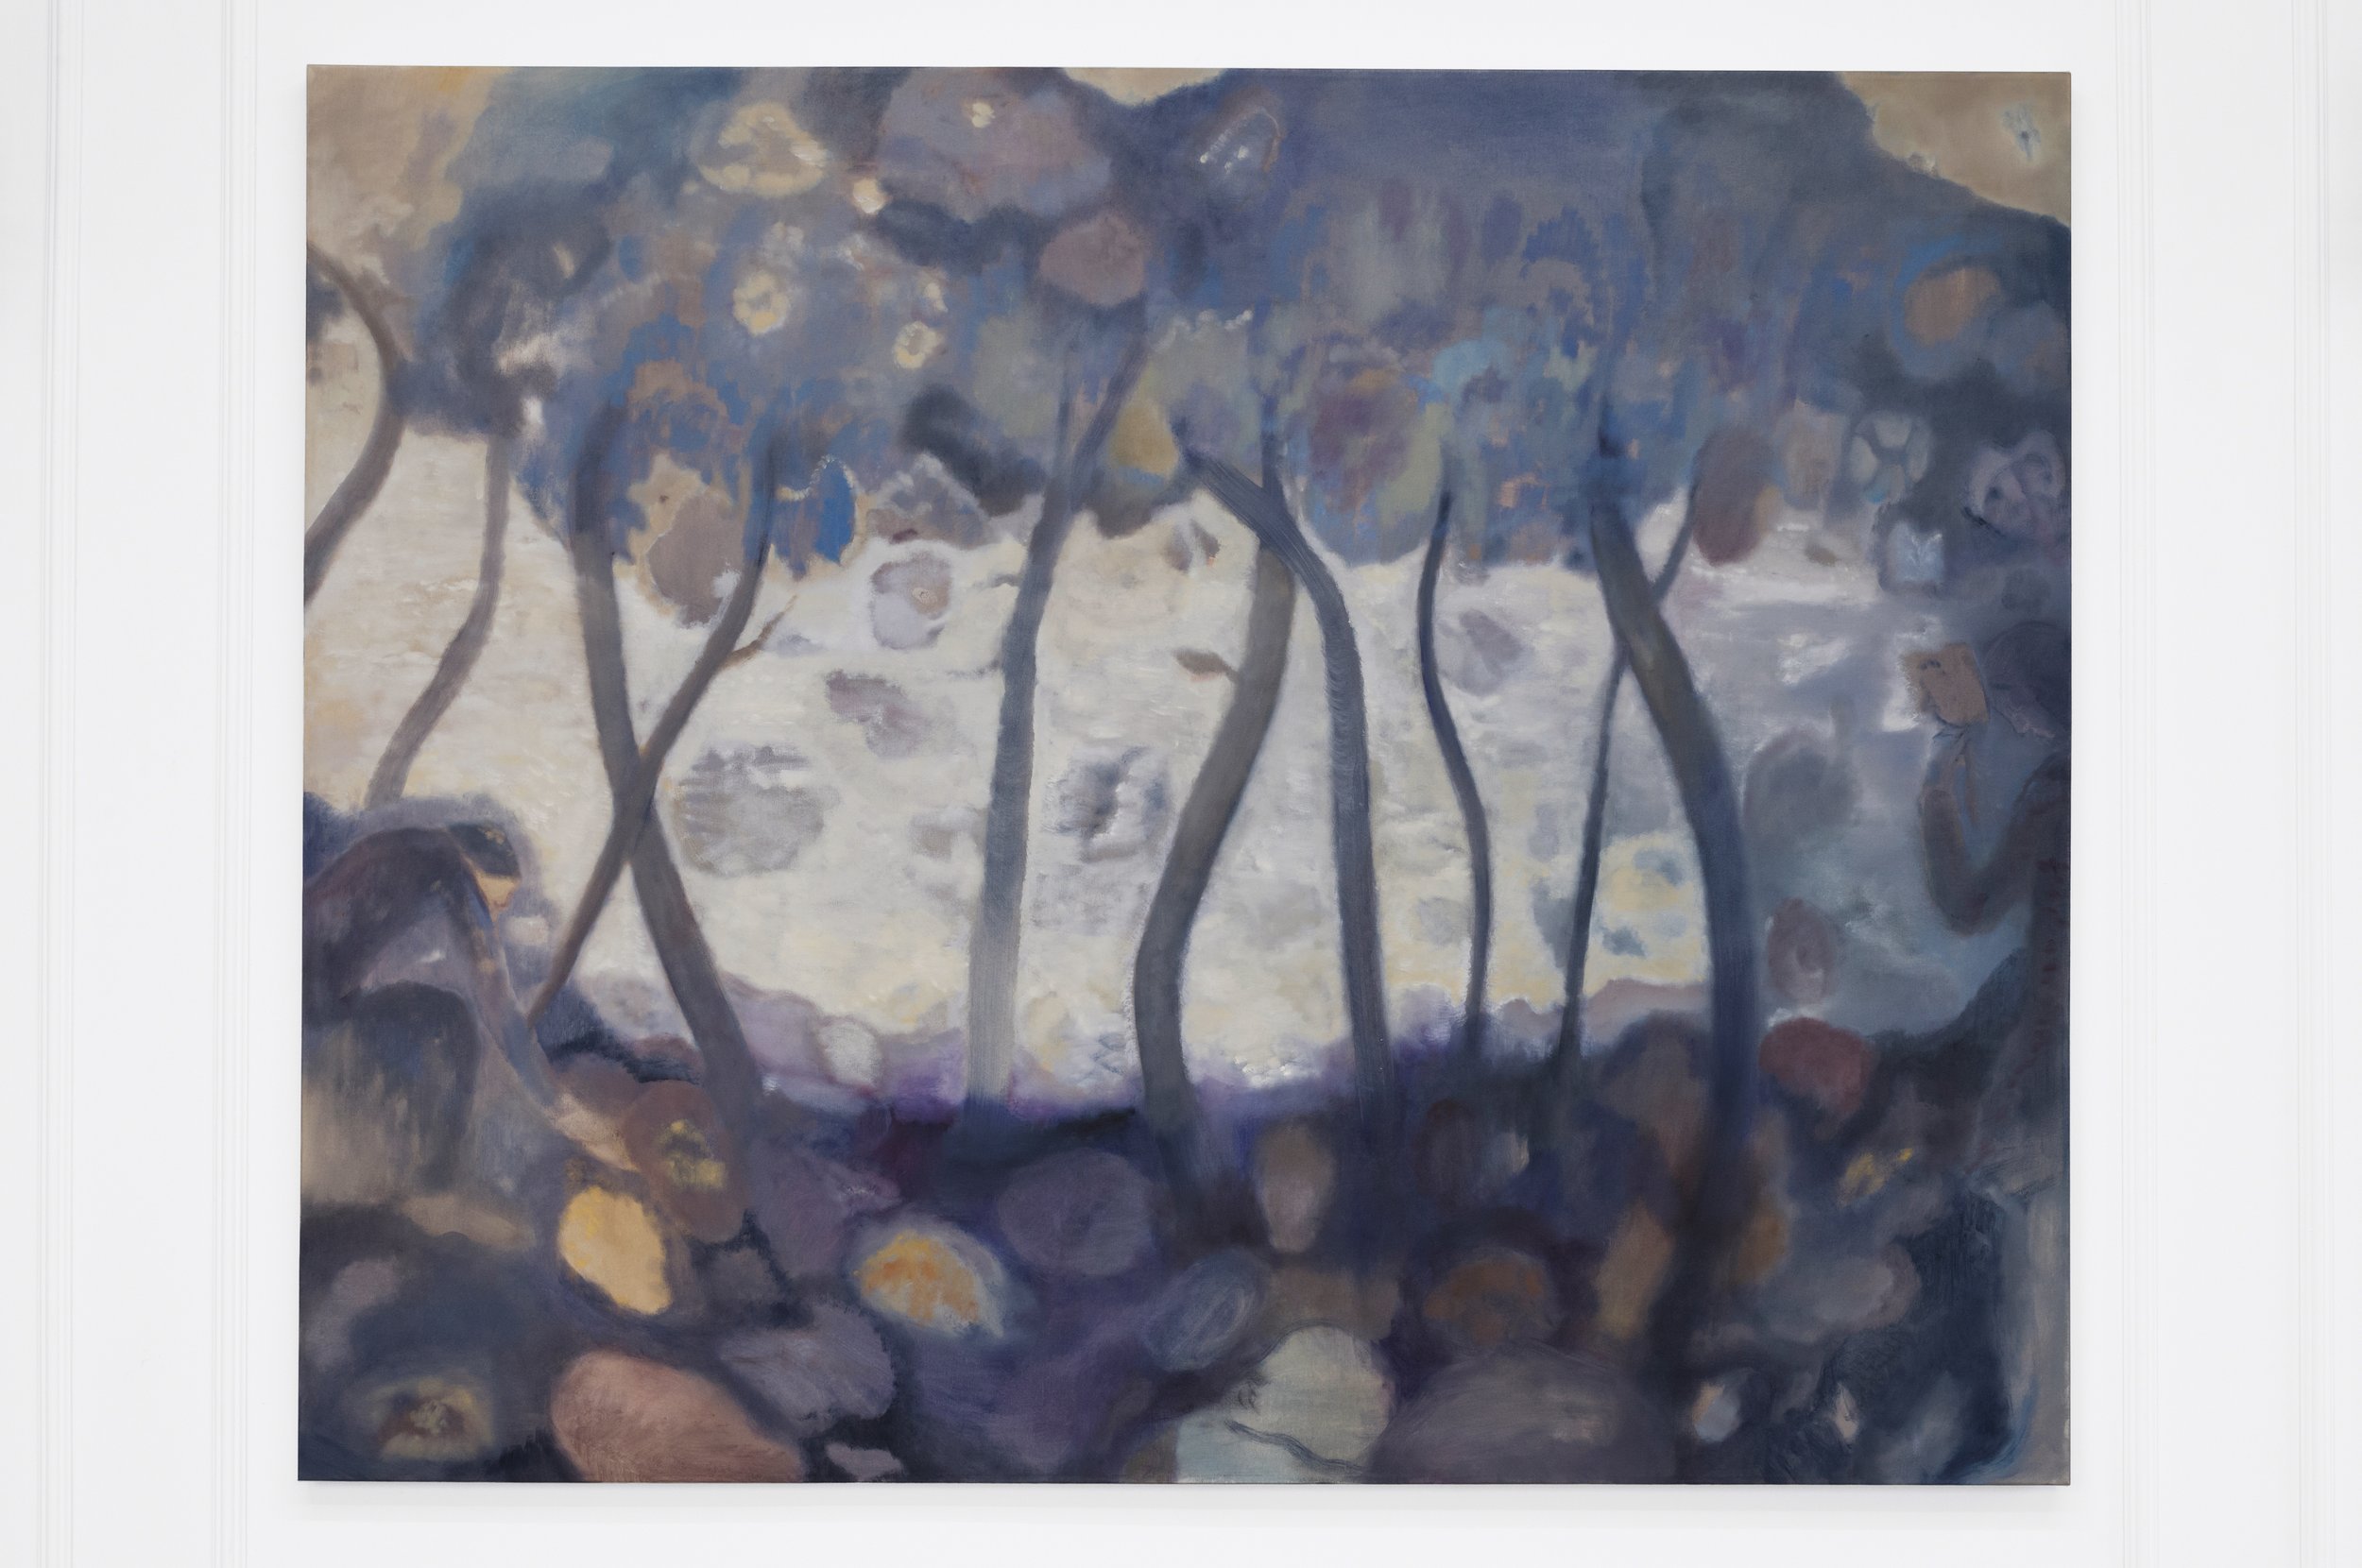 Darby_Milbrath_Song to the Sea_2023_Oil on canvas_48 x 60 inches.jpg